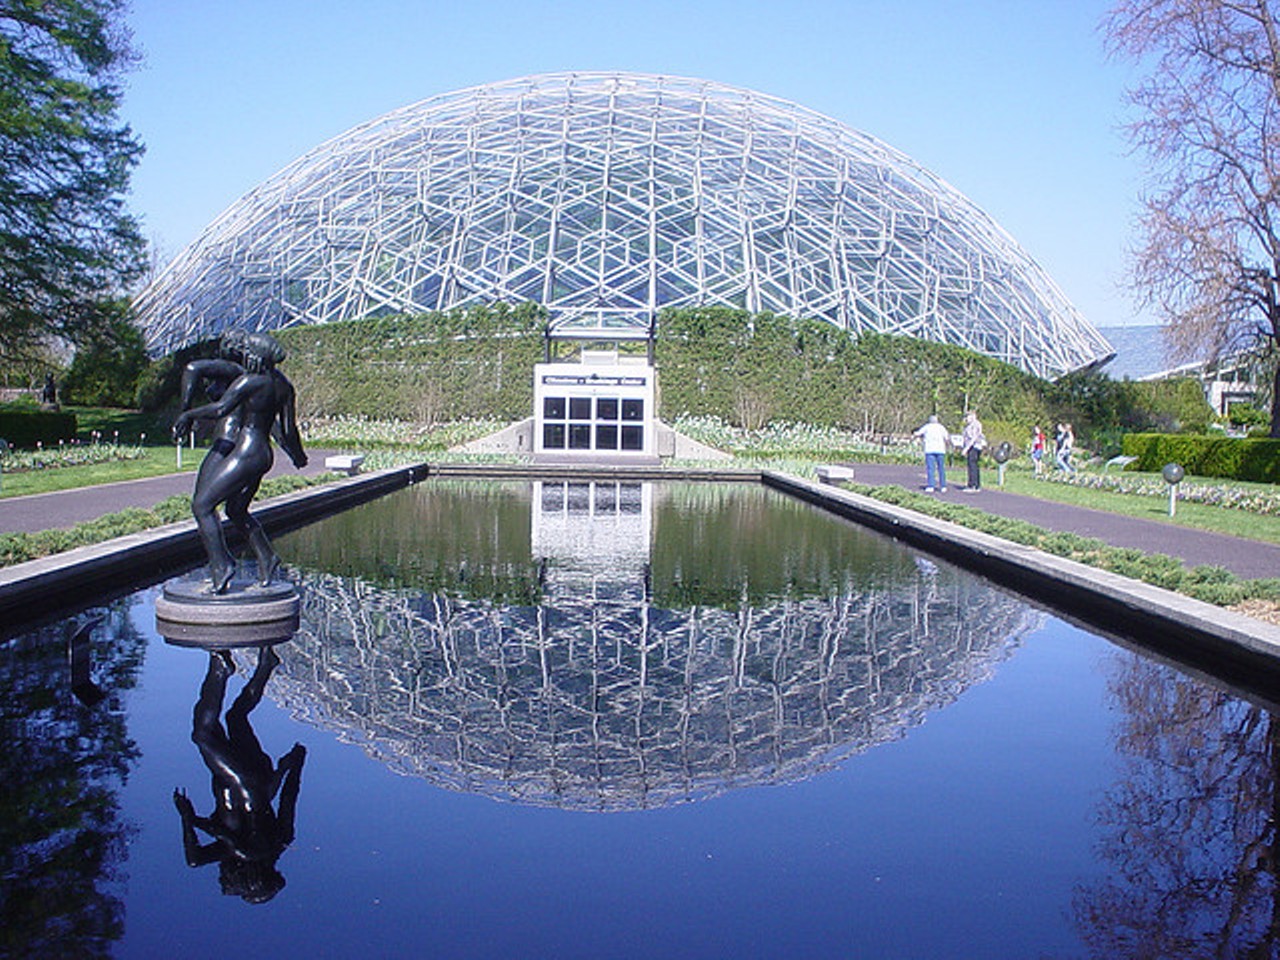 Step inside the Climatron at the Missouri Botanical Garden. This baby reaches 85 degrees during the day all year round. It's like a rainforest getaway right in your backyard.Photo courtesy of Flickr / Trish